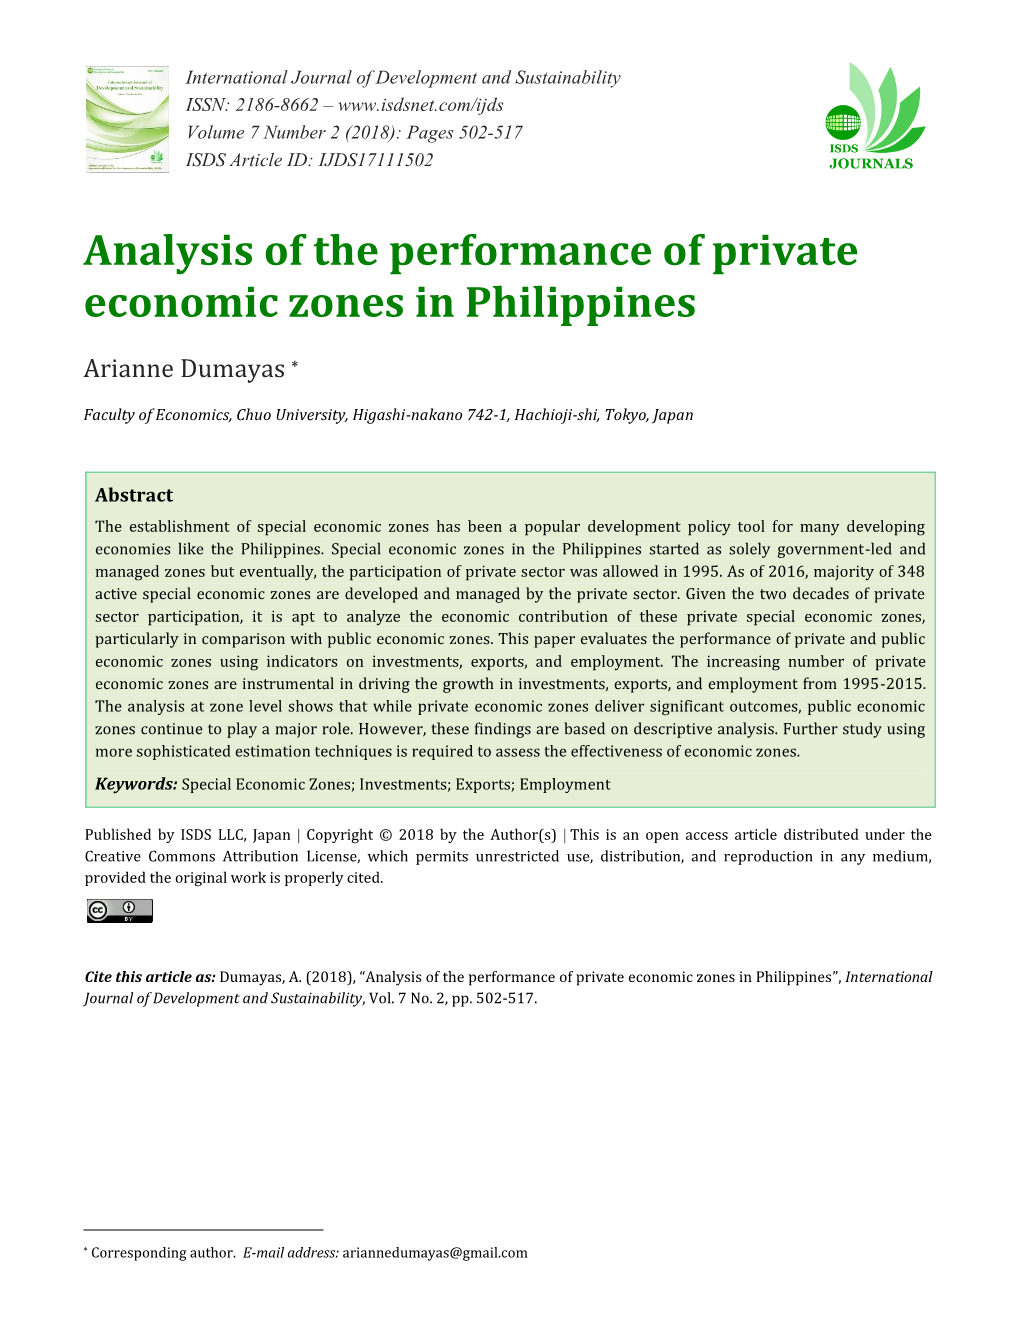 Analysis of the Performance of Private Economic Zones in Philippines